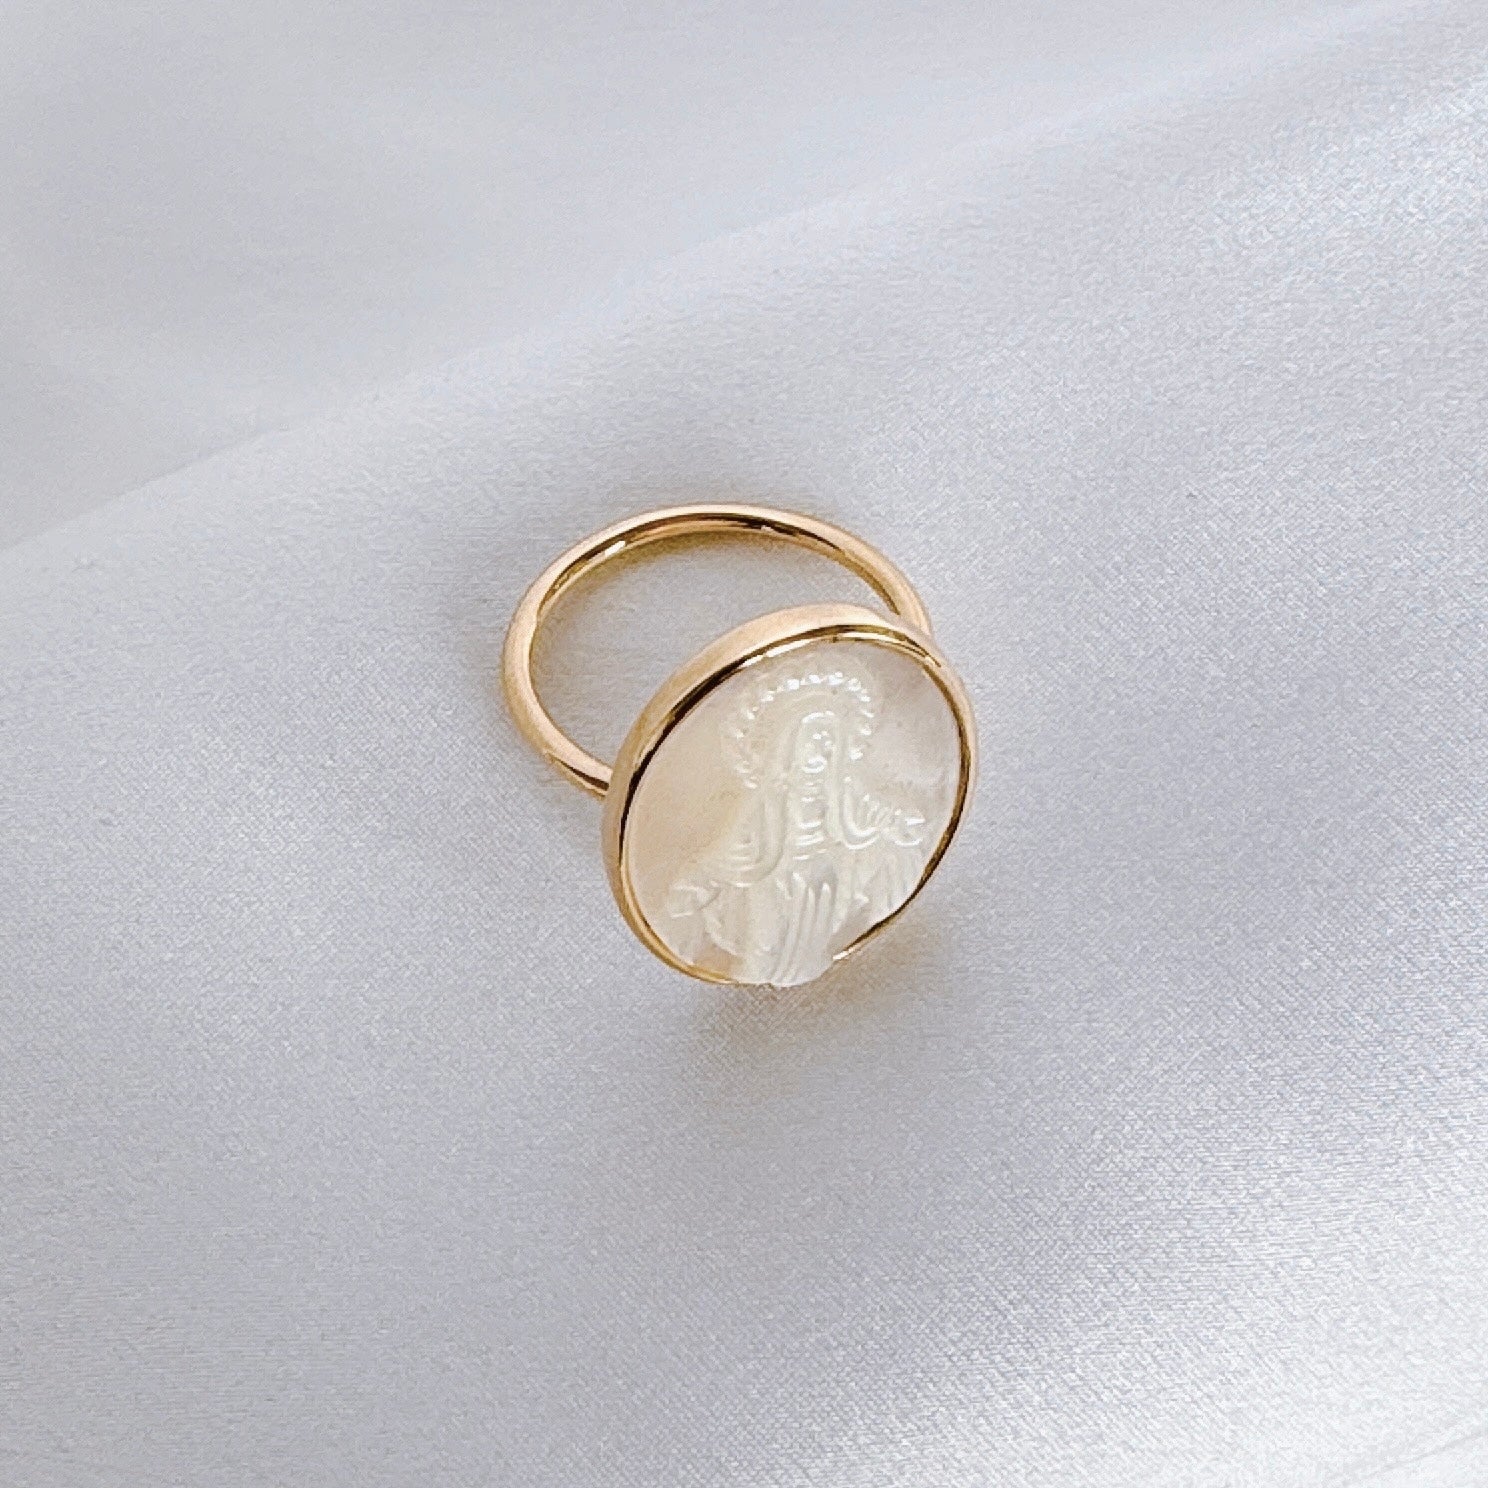 Gold-plated “Virgin Mary mother-of-pearl” ring 